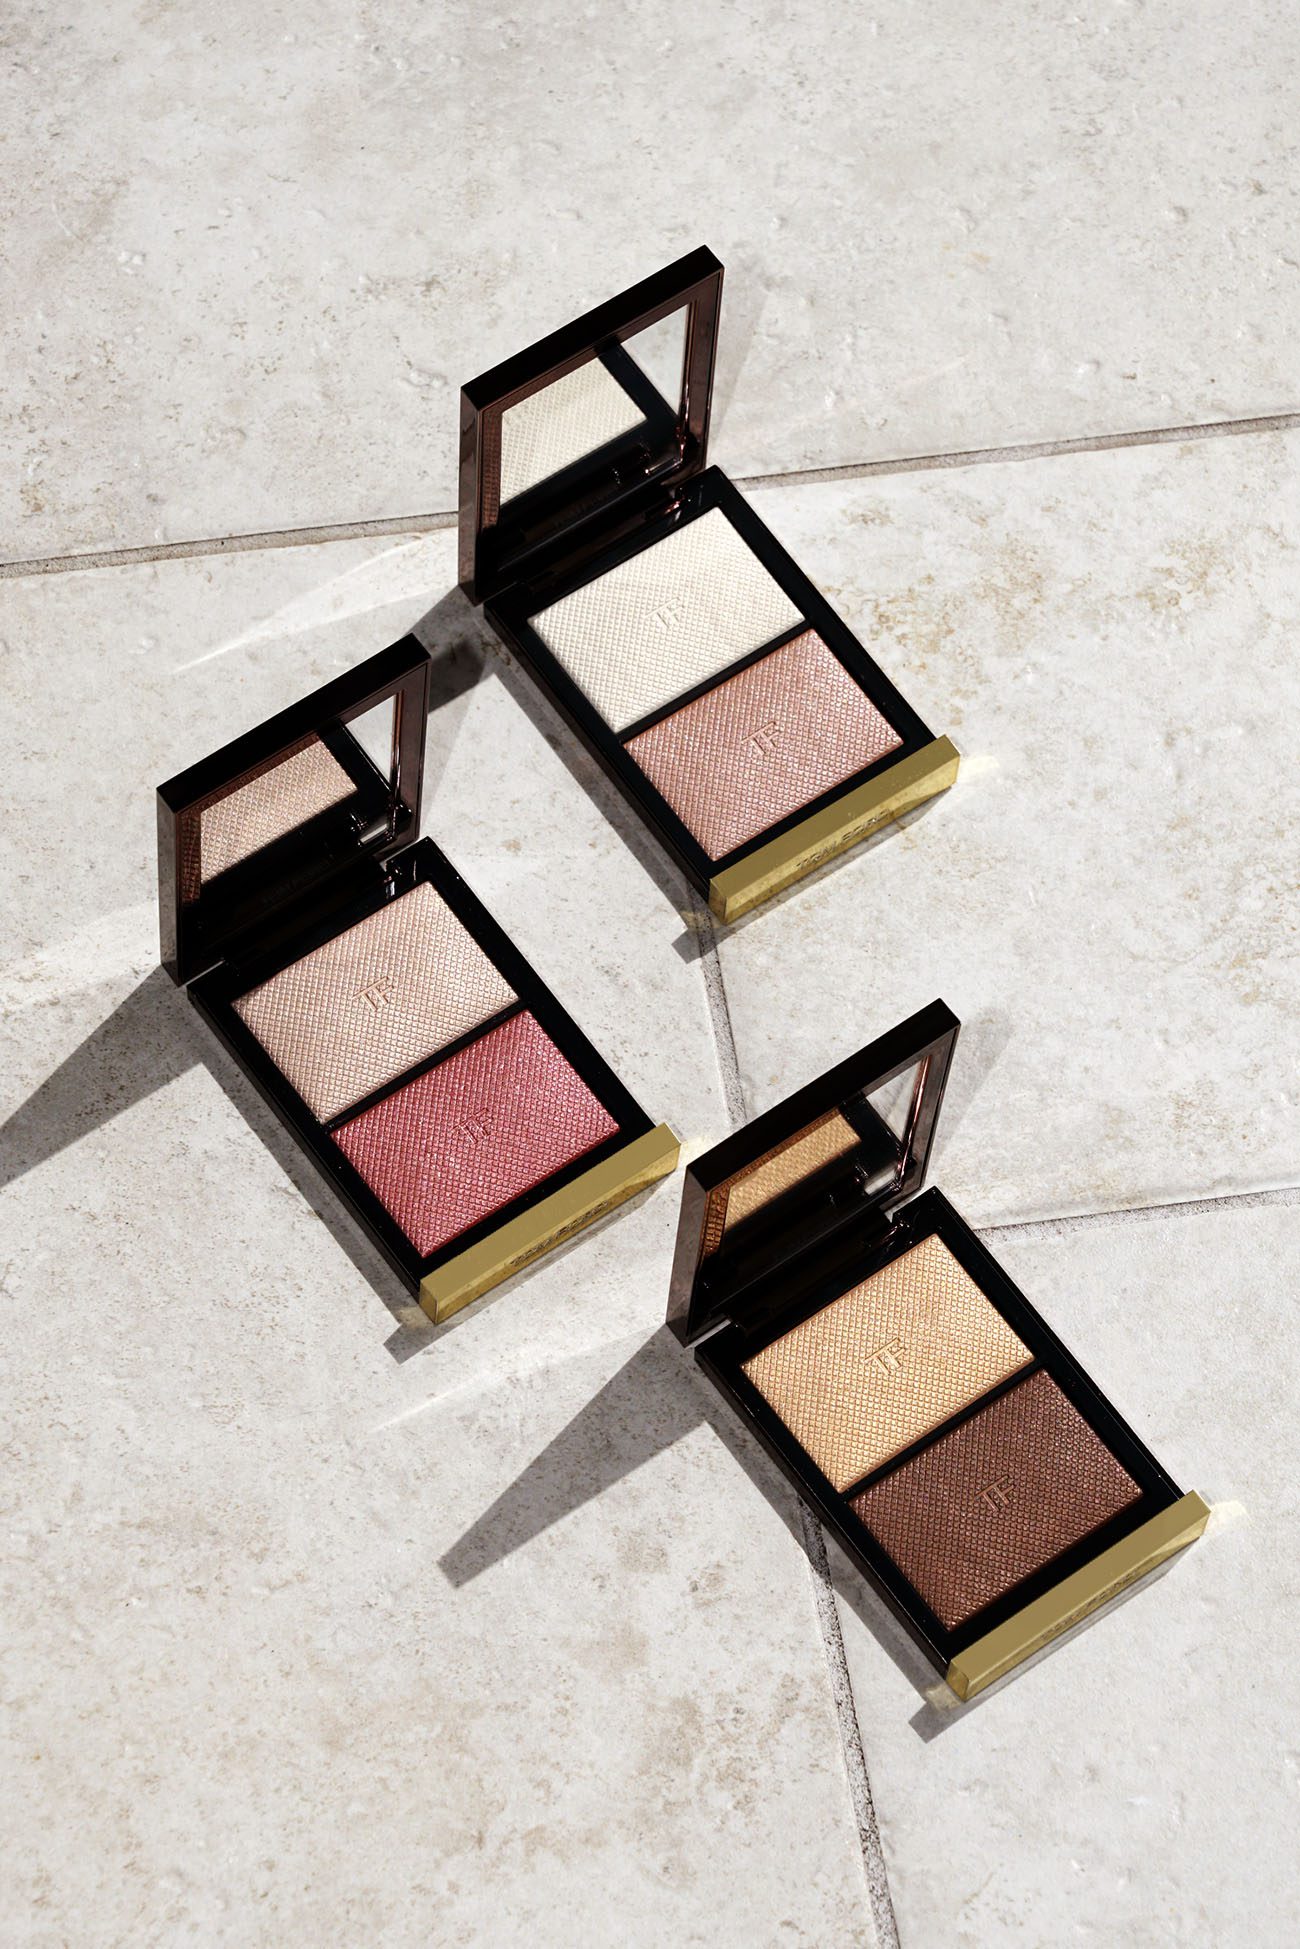 Tom Ford Skin Illuminating Duo: Moodlight, Flicker and Incandescent